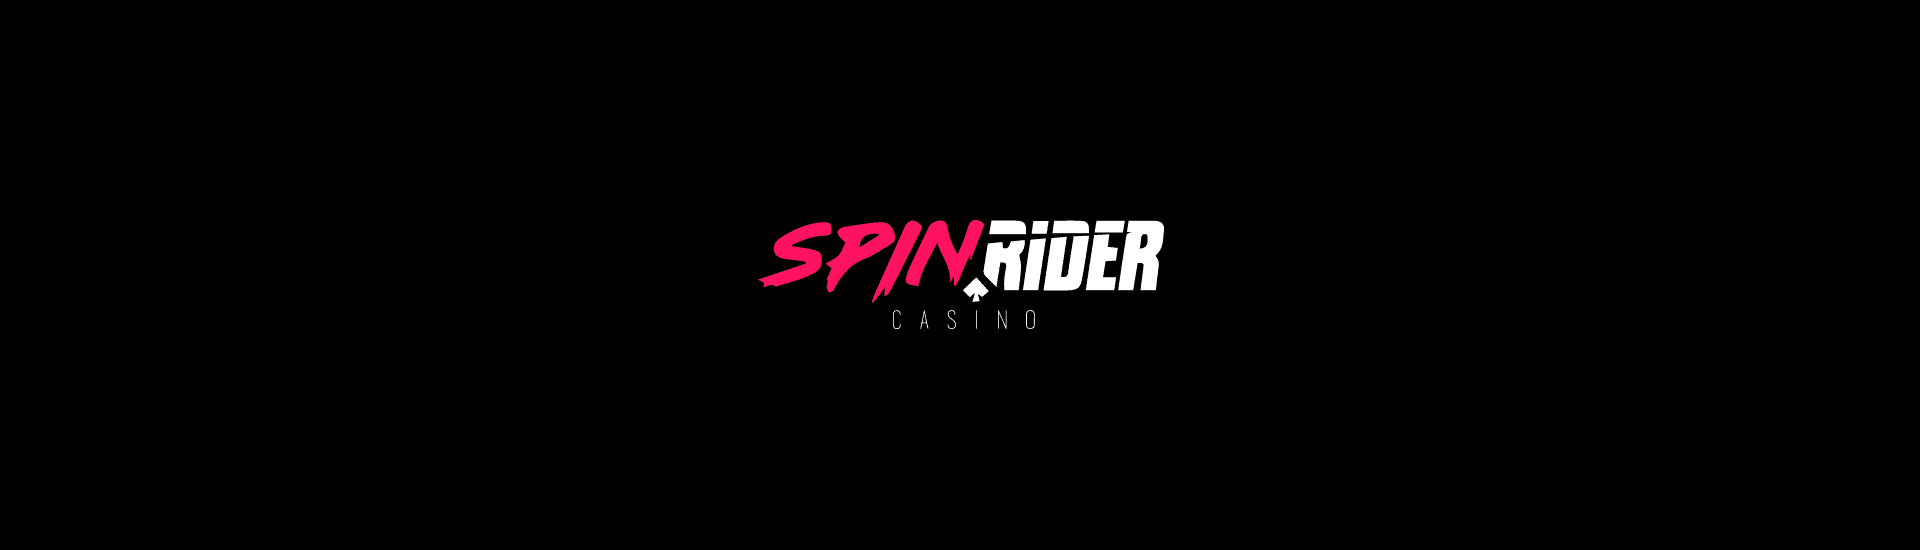 Spin Rider Featured Image